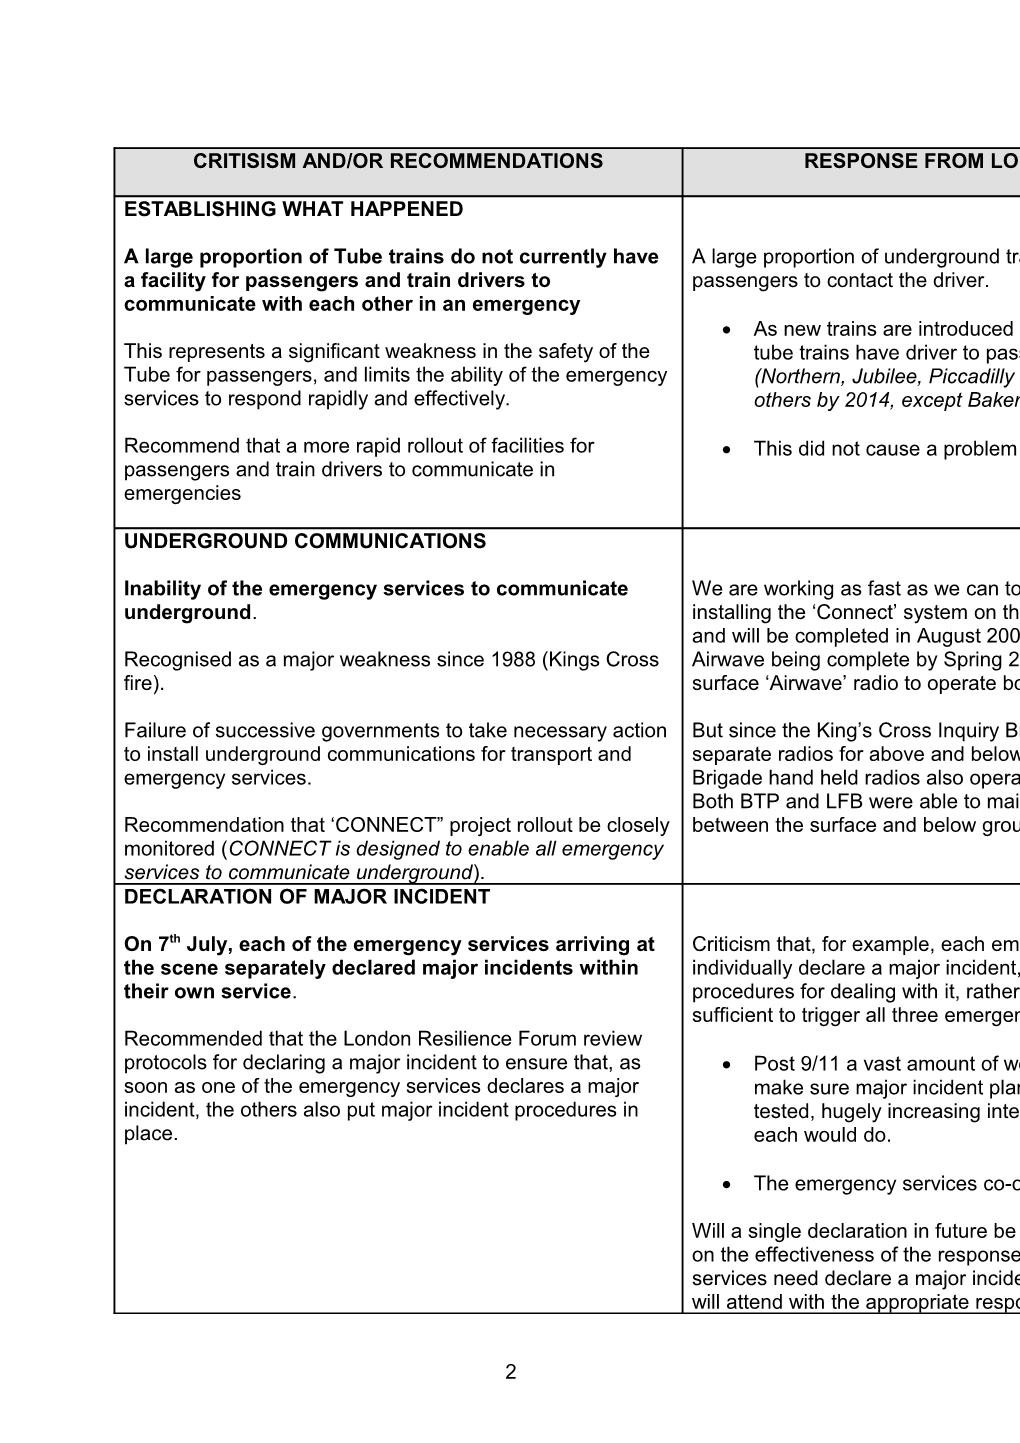 Resume of Recommendations and Responses